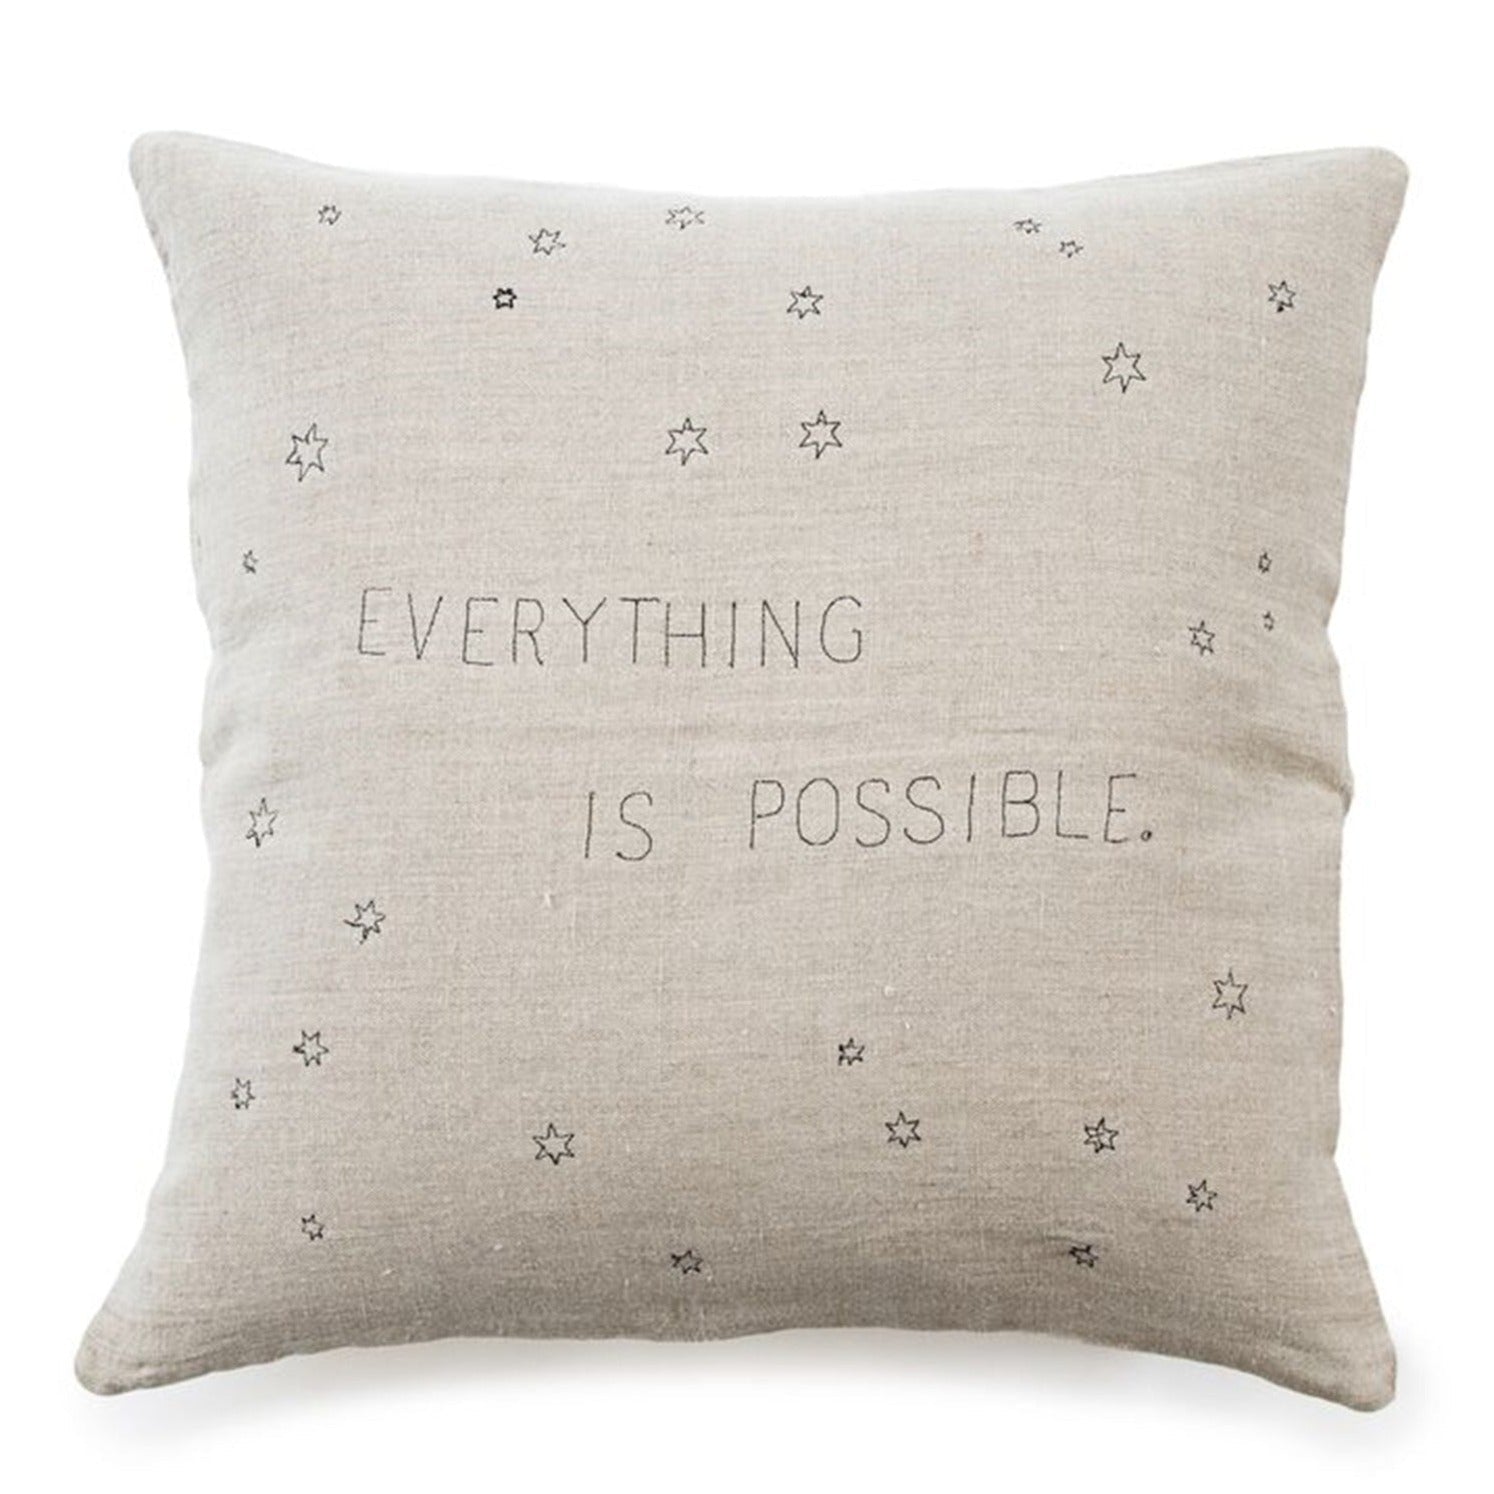 Sugarboo Designs Everything Is Possible Pillow